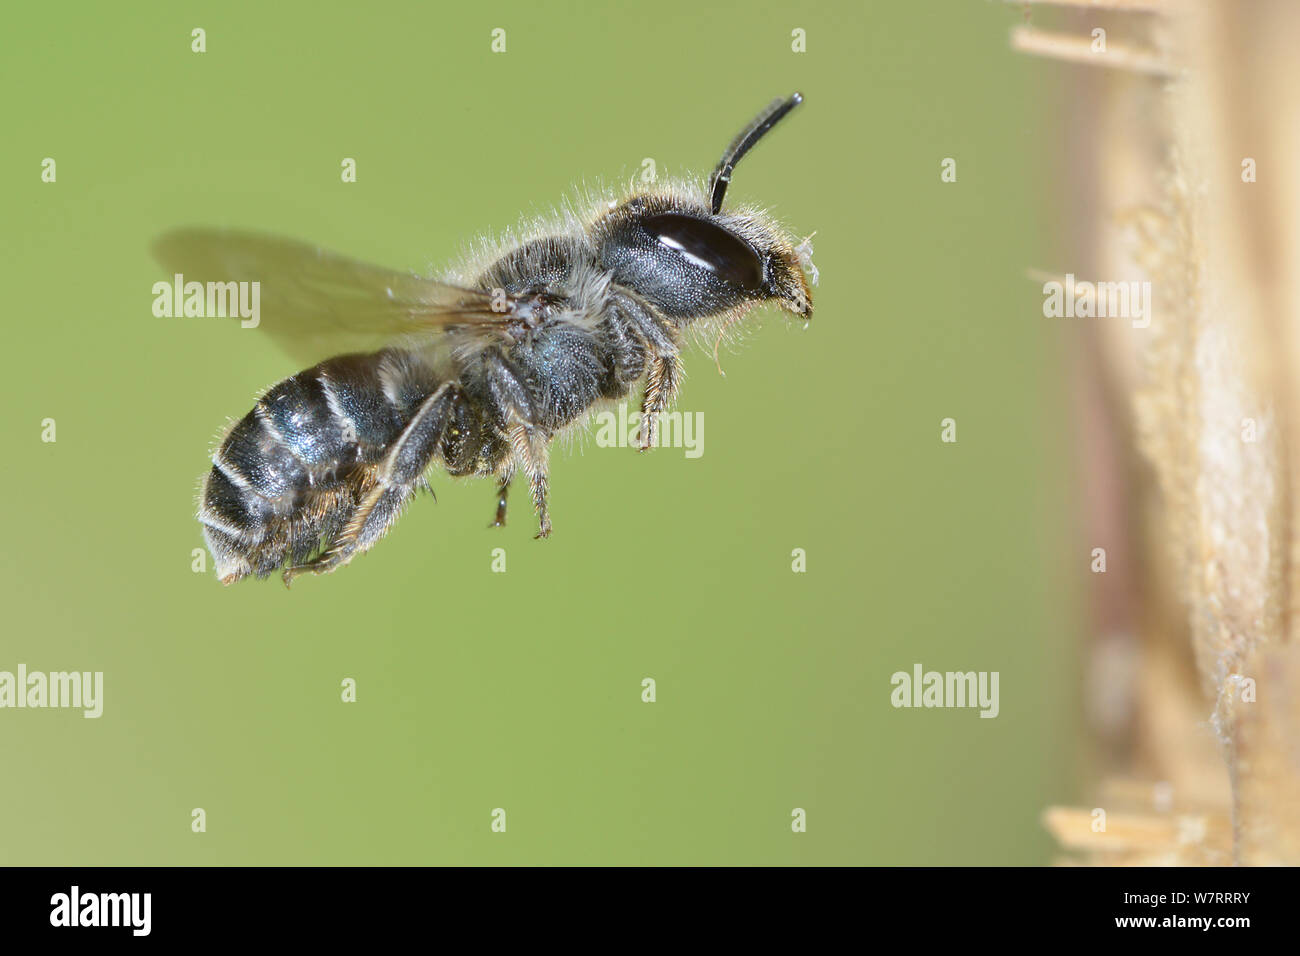 Female Blue mason bee (Osmia caerulescens) flying into an insect box in a garden, Hertfordshire, England, UK, June. Stock Photo